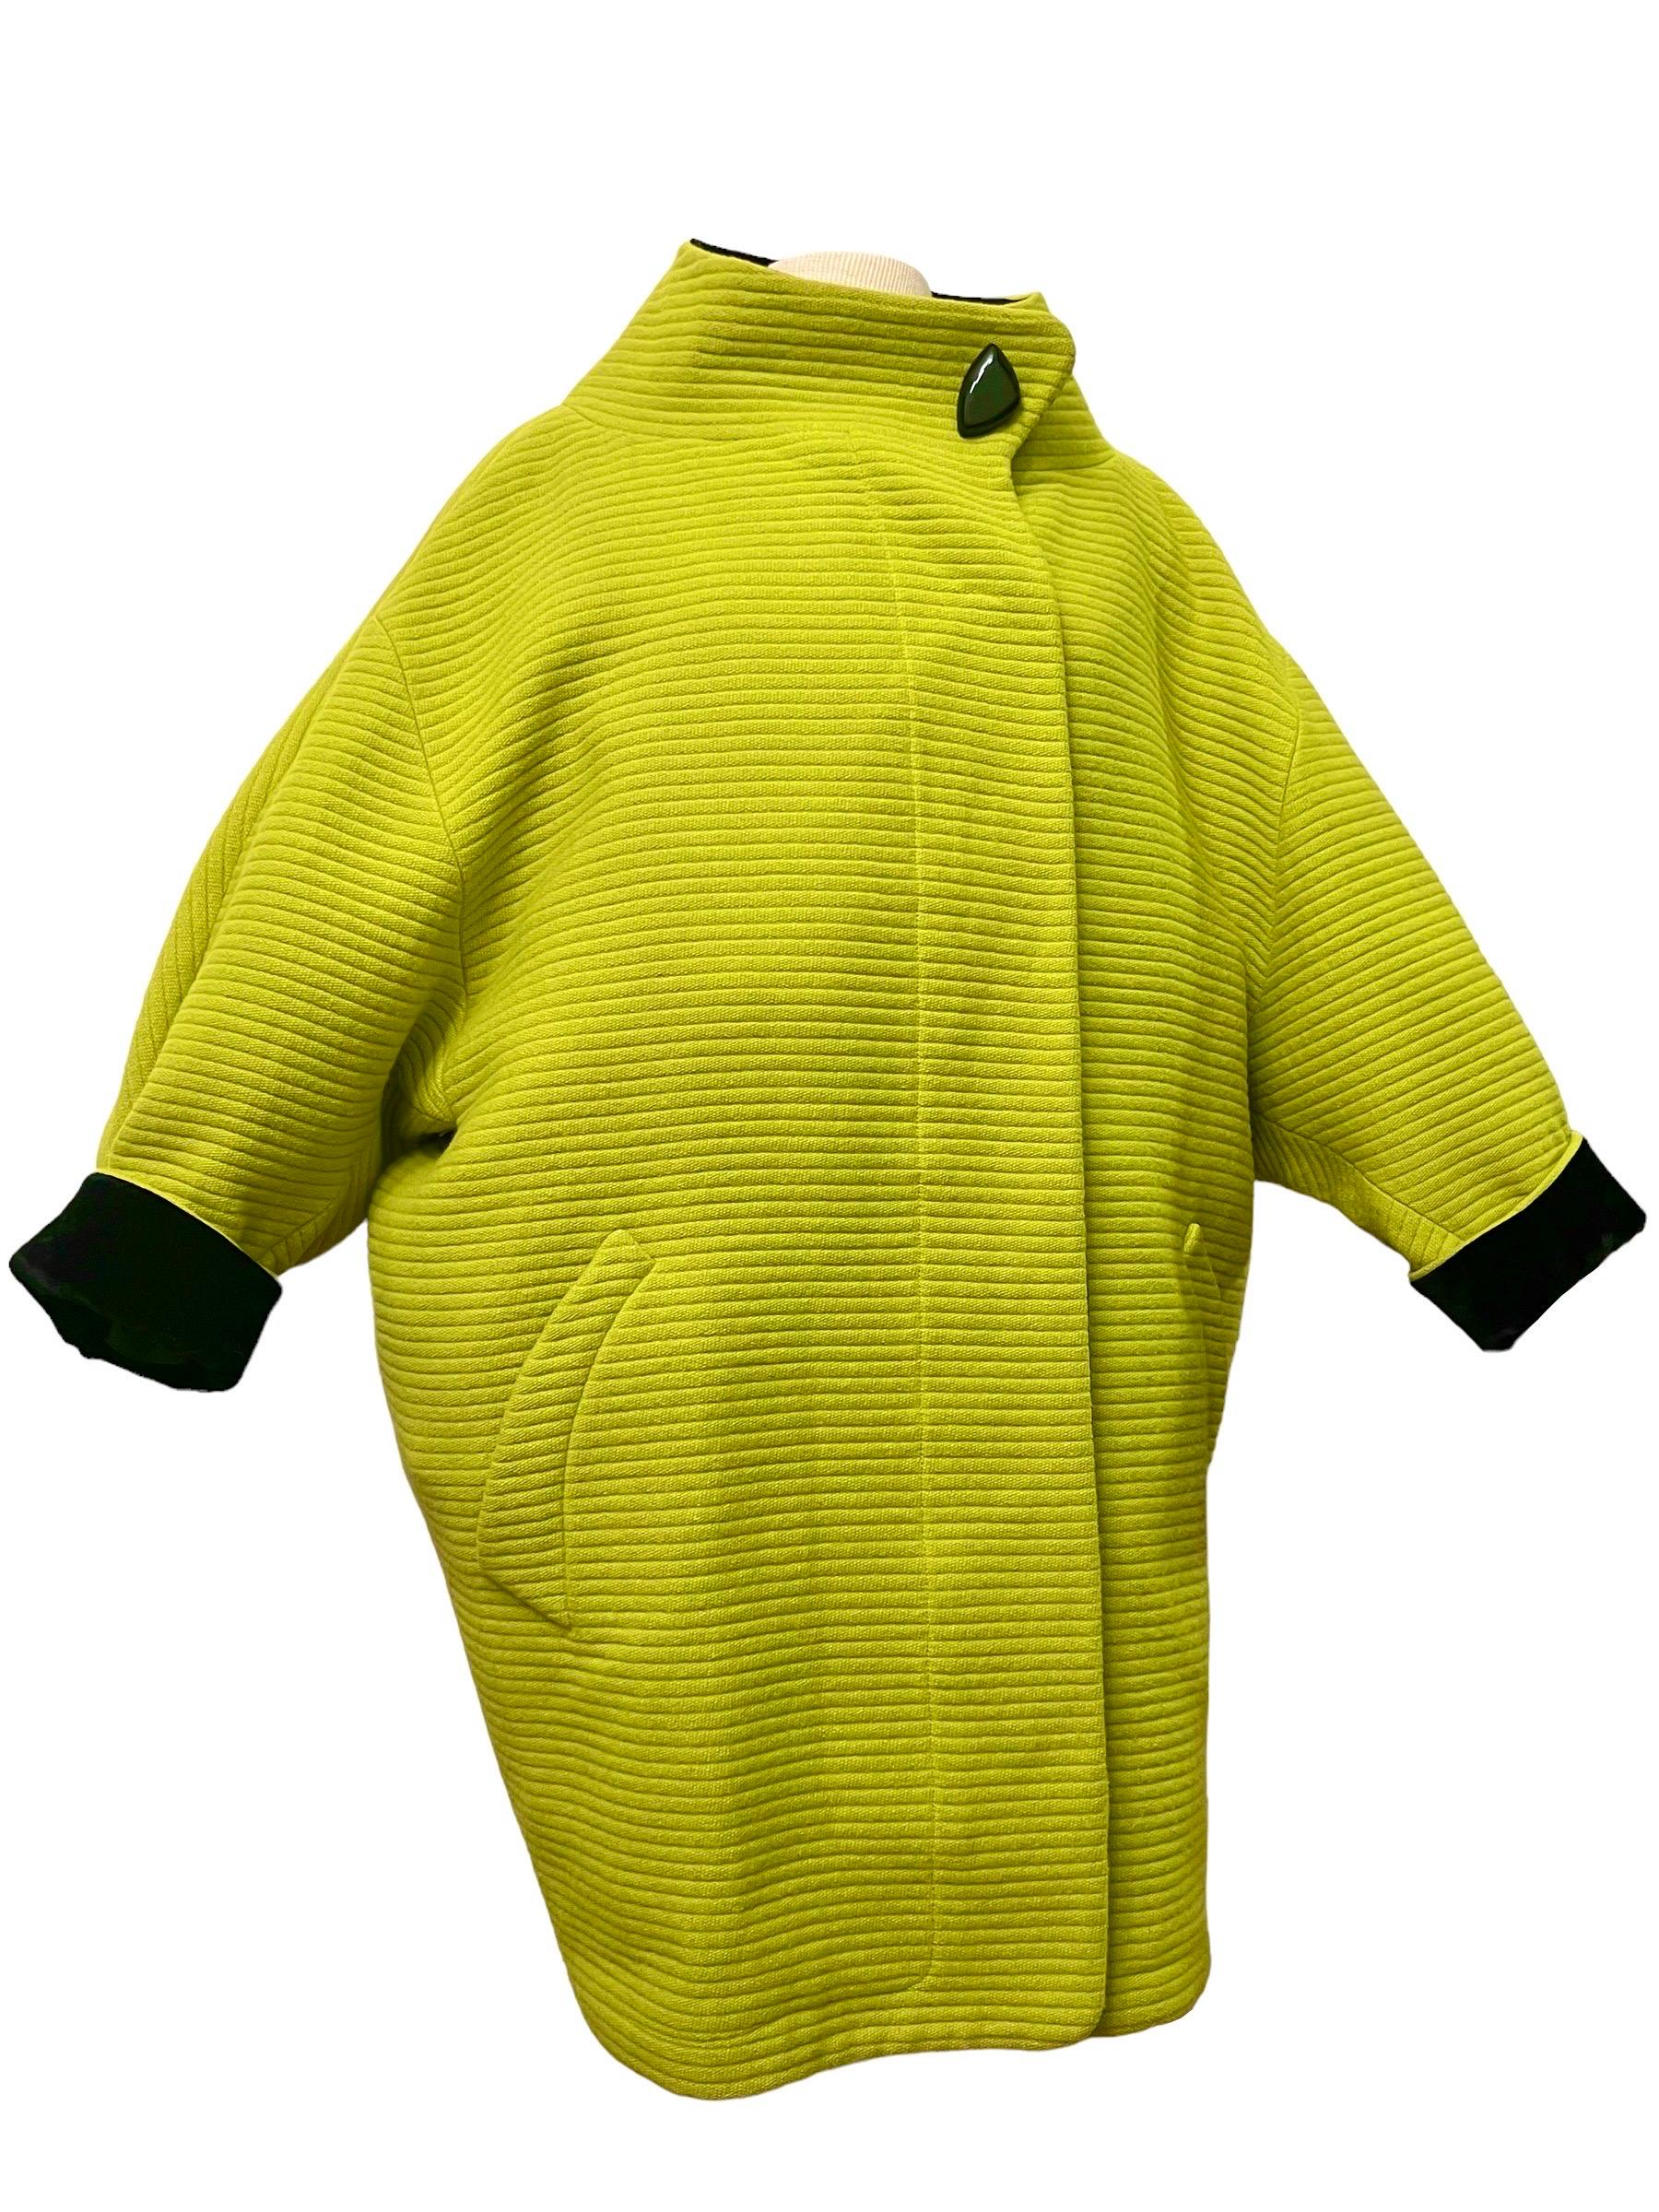 F/W 1990 Thierry Mugler Lime Green Futuristic Cocoon Coat For Sale 2